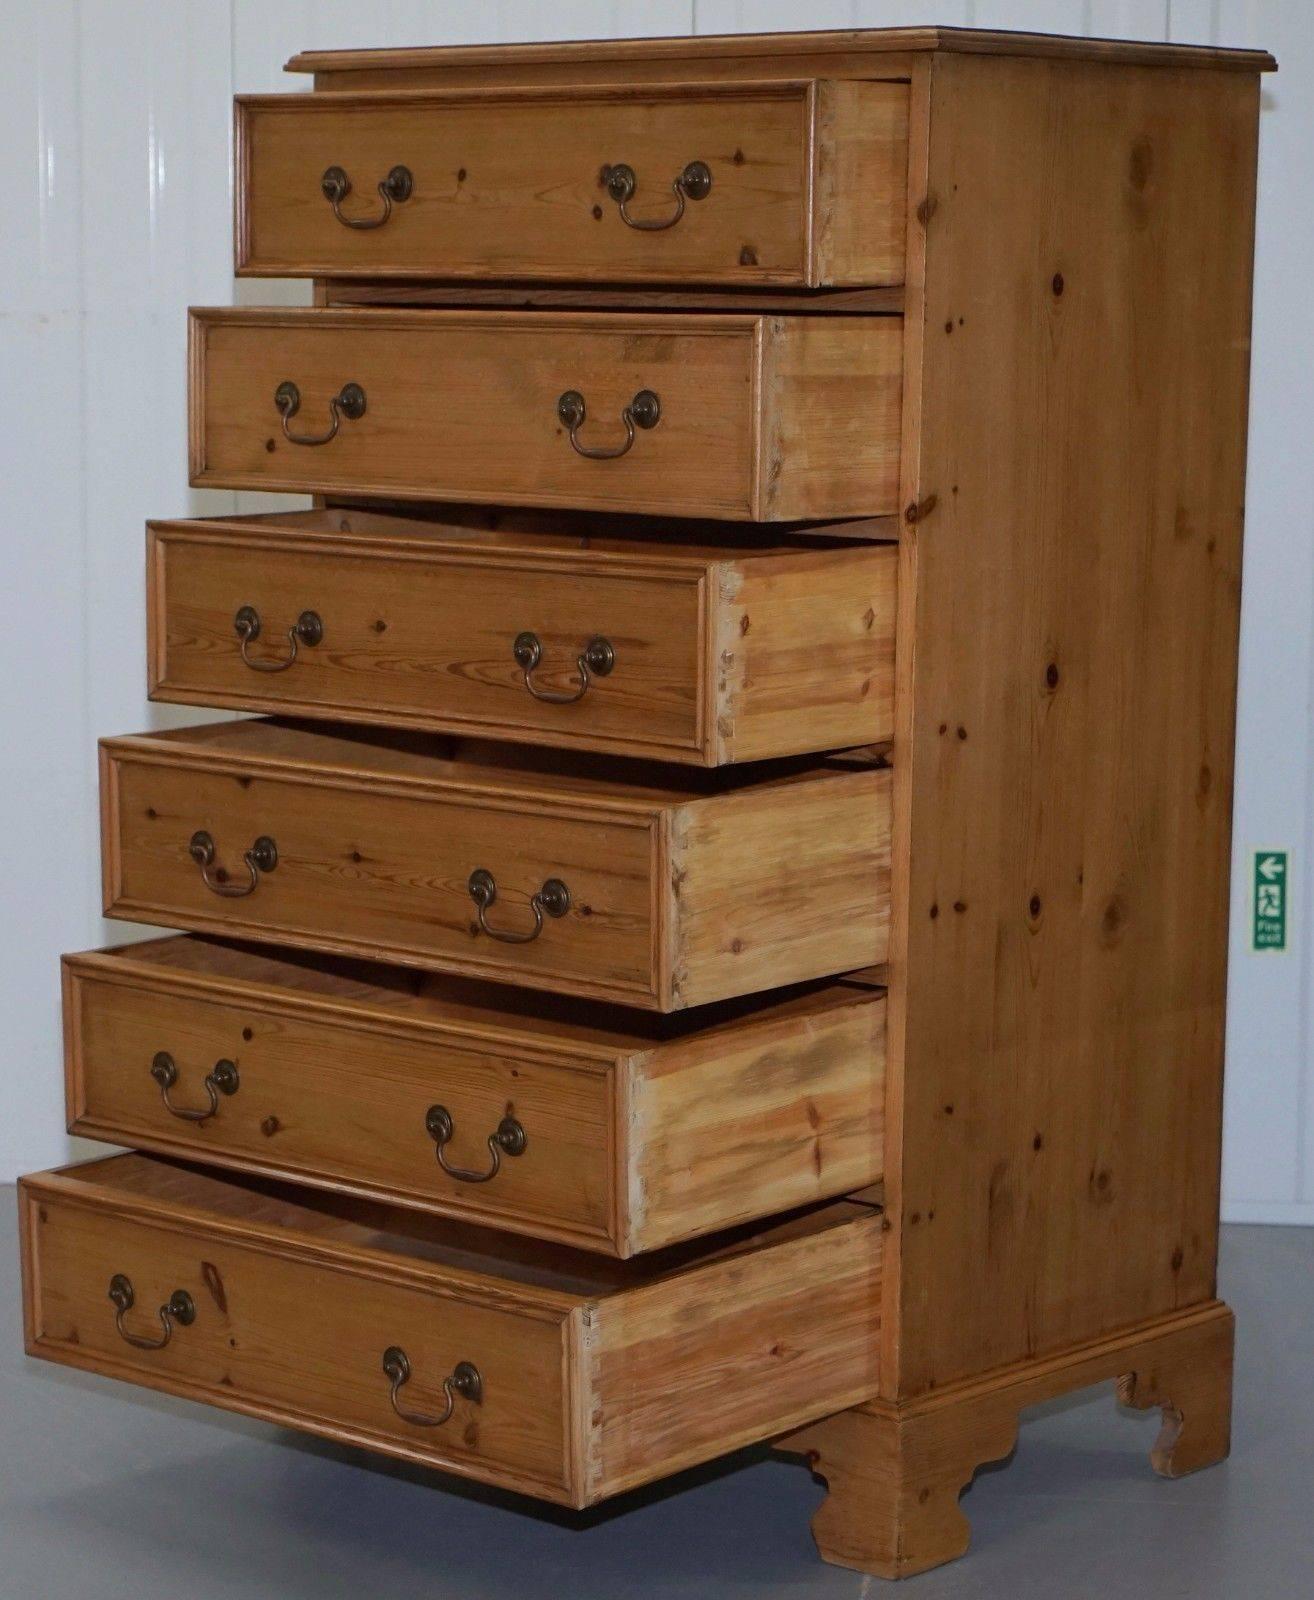 Pine Vintage Farmhouse Country Large Deep Tallboy Chest of Drawers Swan Neck Handles